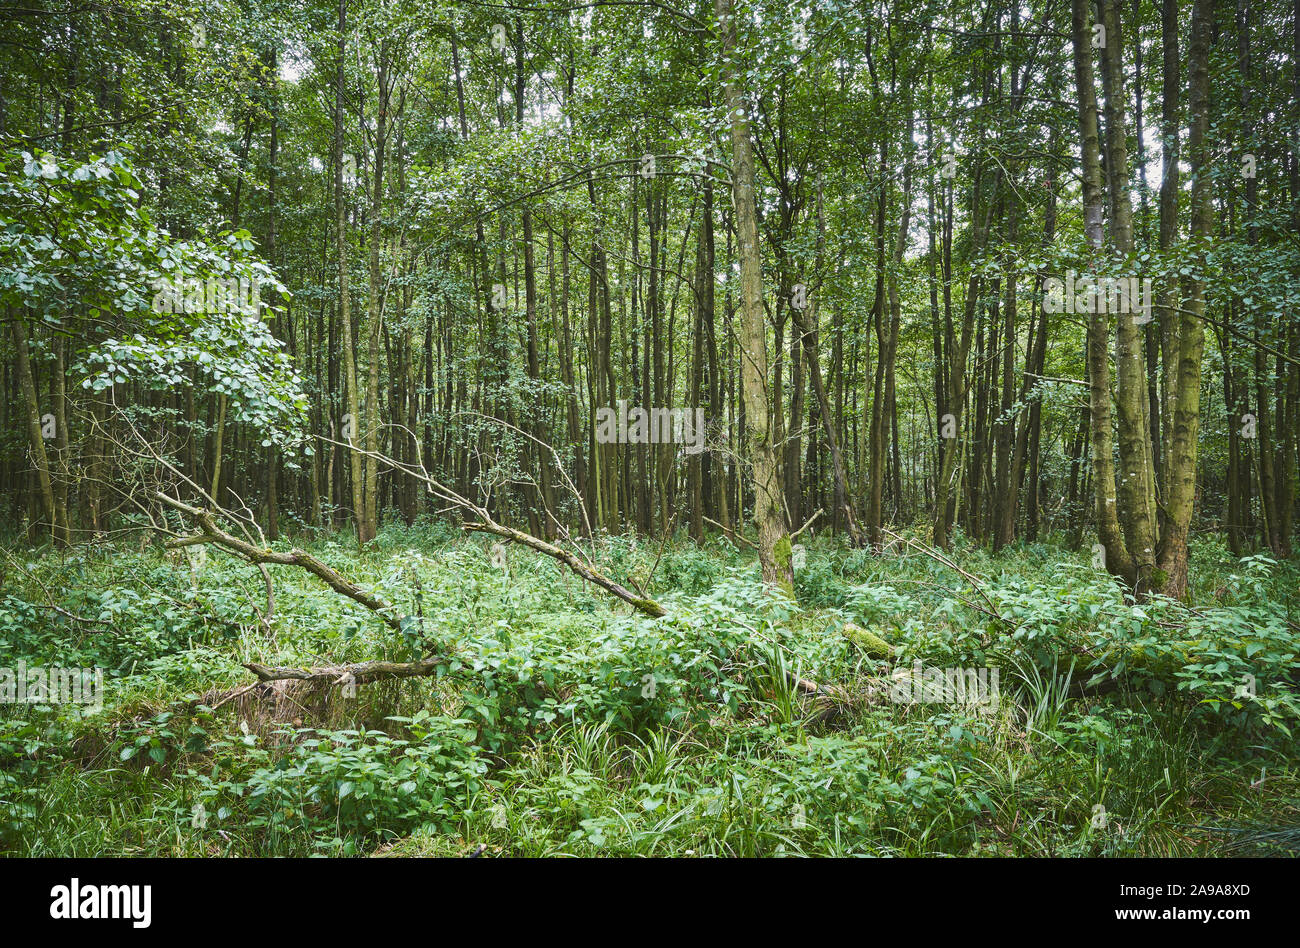 Picture of a dense primeval forest. Stock Photo